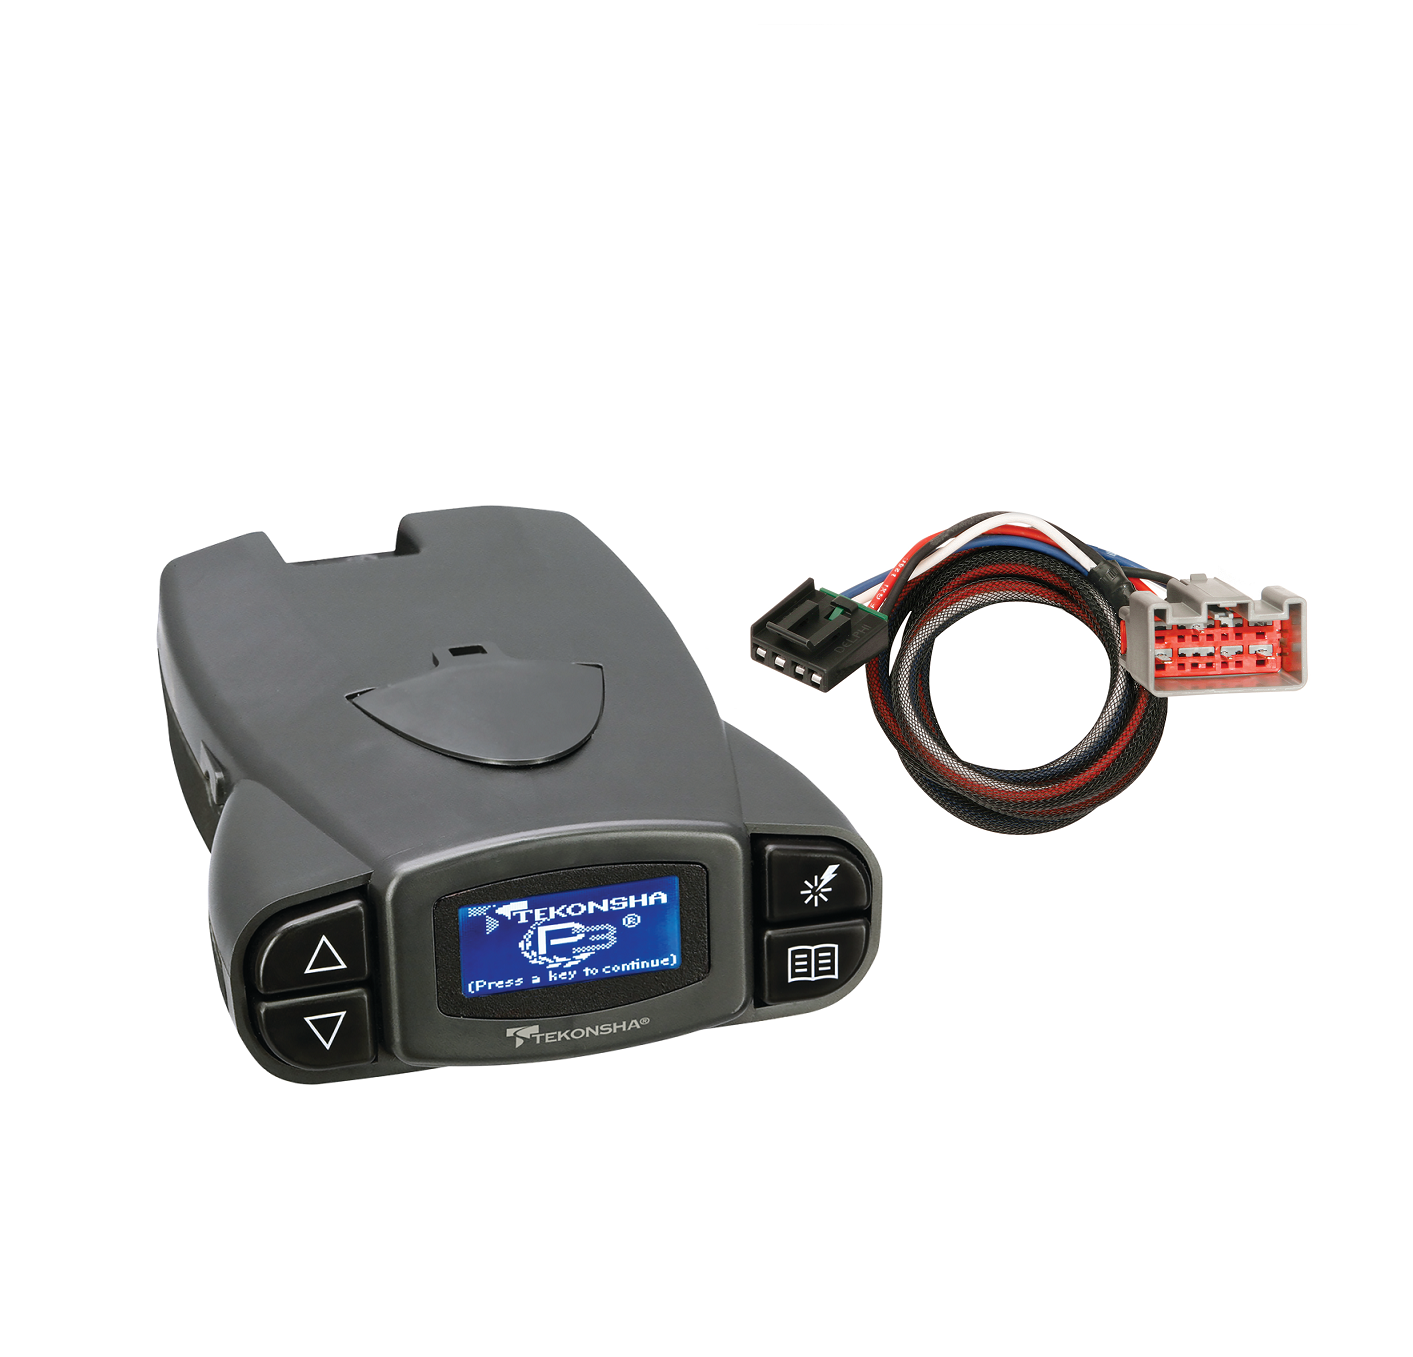 2015-2024 Lincoln Navigator 3036 Tekonsha Prodigy P3 Proportional Brake Controller for Trailers with 1-4 Axles 90195 w/ Plug-N-Play Wire